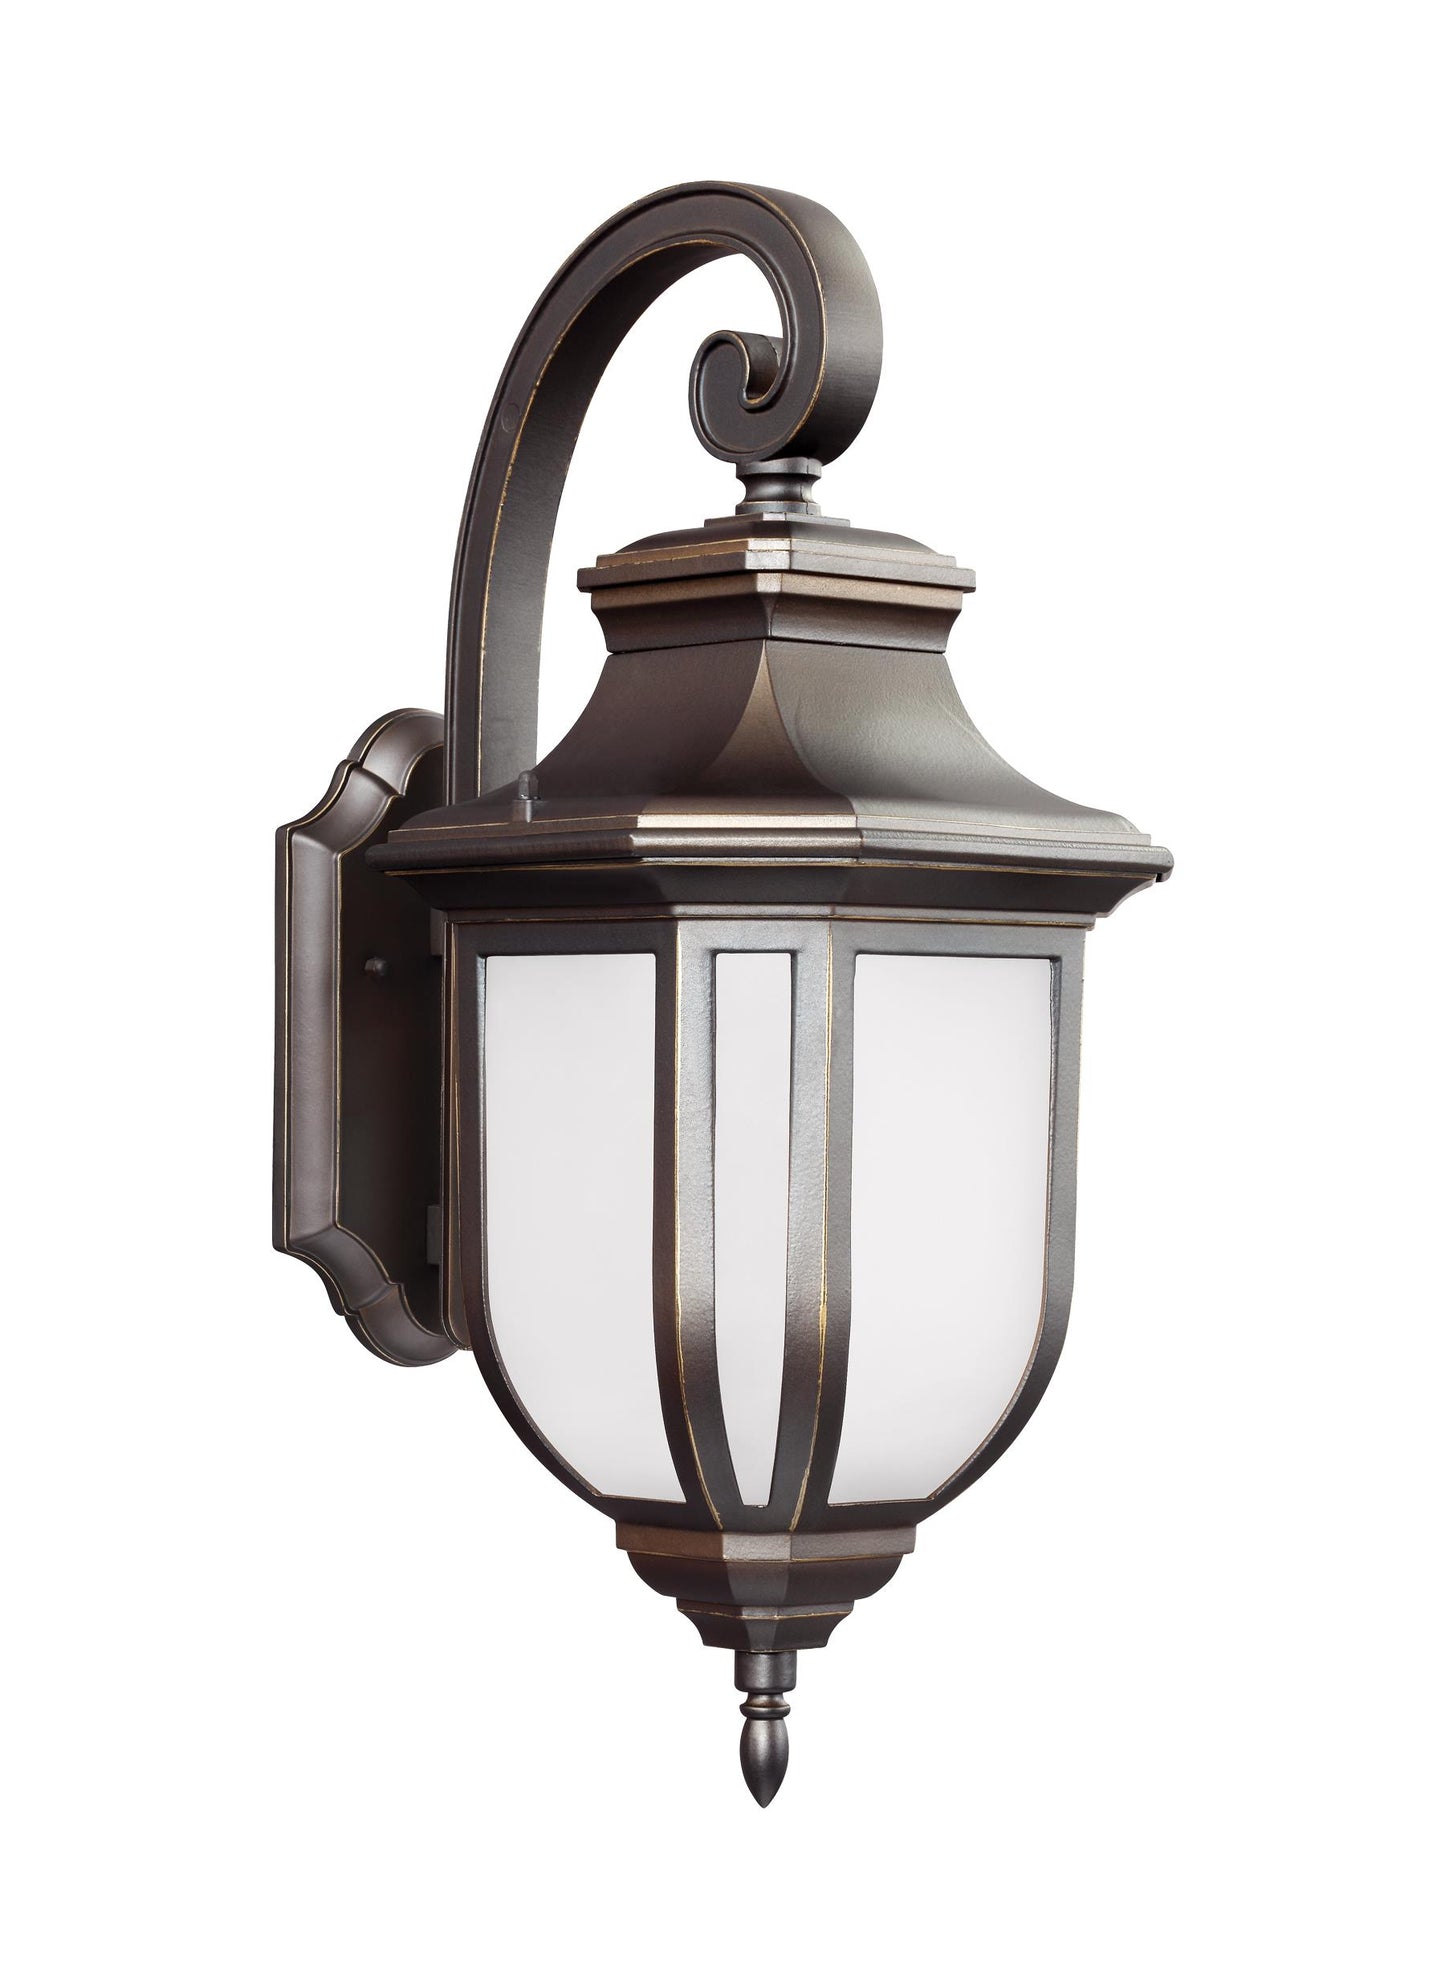 Childress traditional 1-light outdoor exterior large wall lantern sconce in antique bronze finish with satin etched glass ...